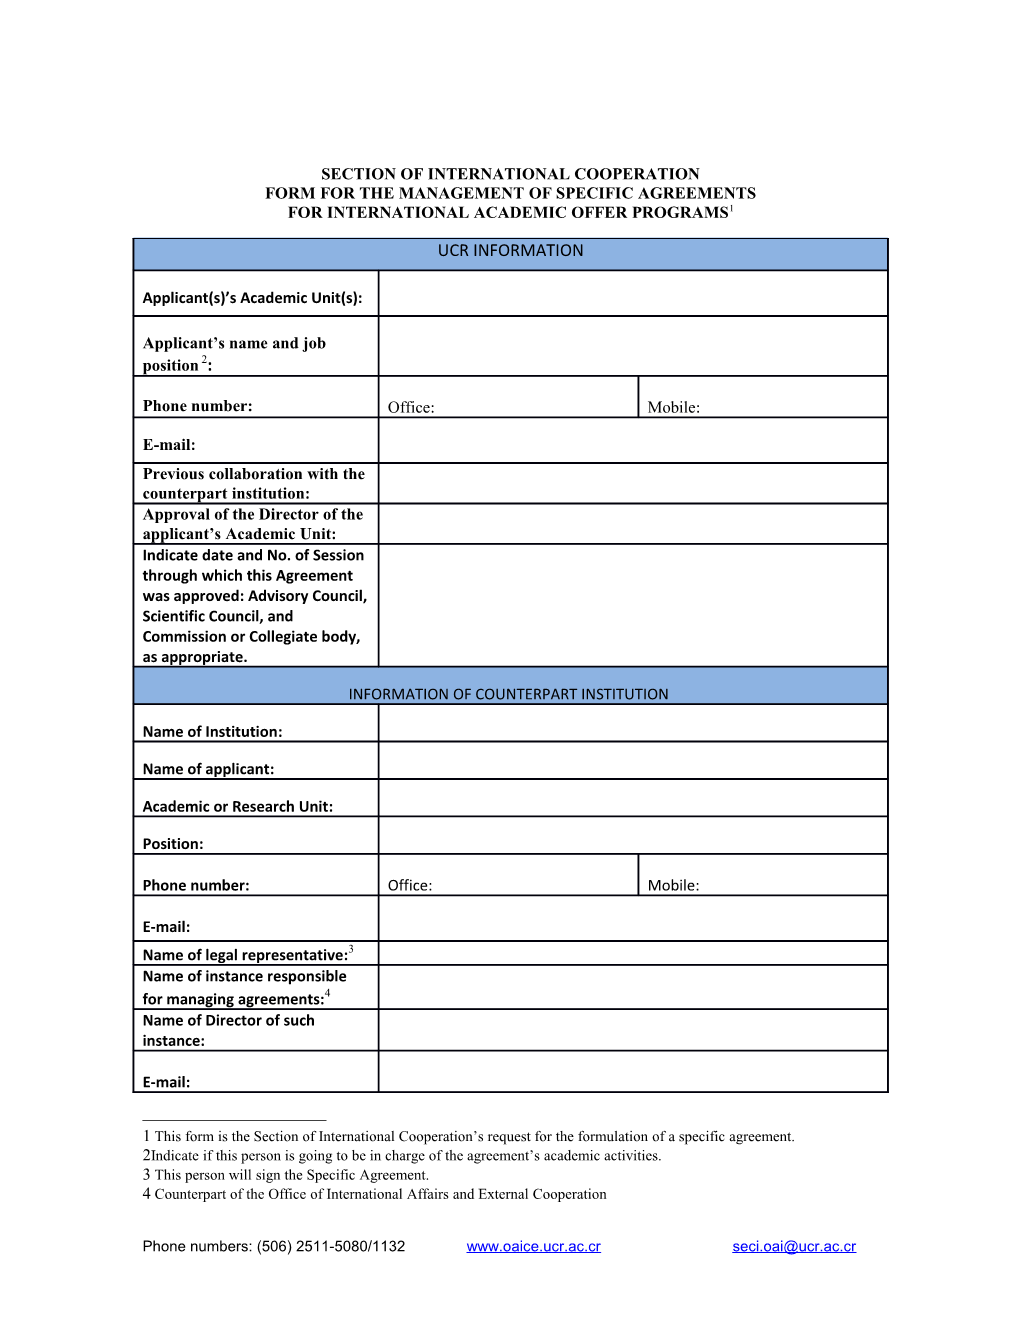 Form for the Management of Specific Agreements